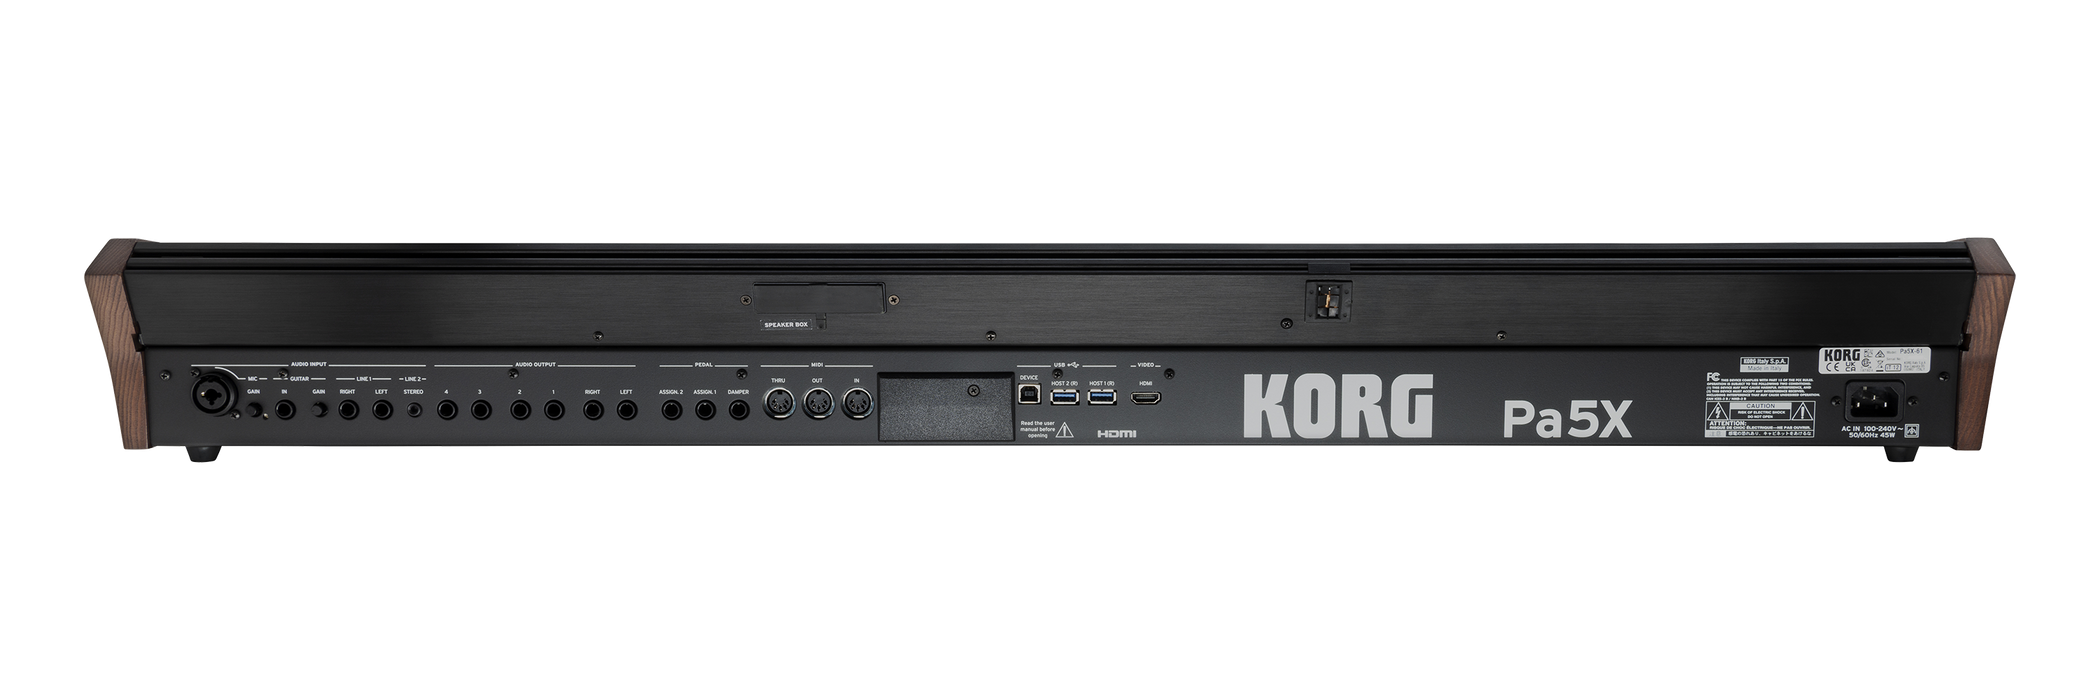 Korg - PA5X88 - 88 semi weighted RX arranger